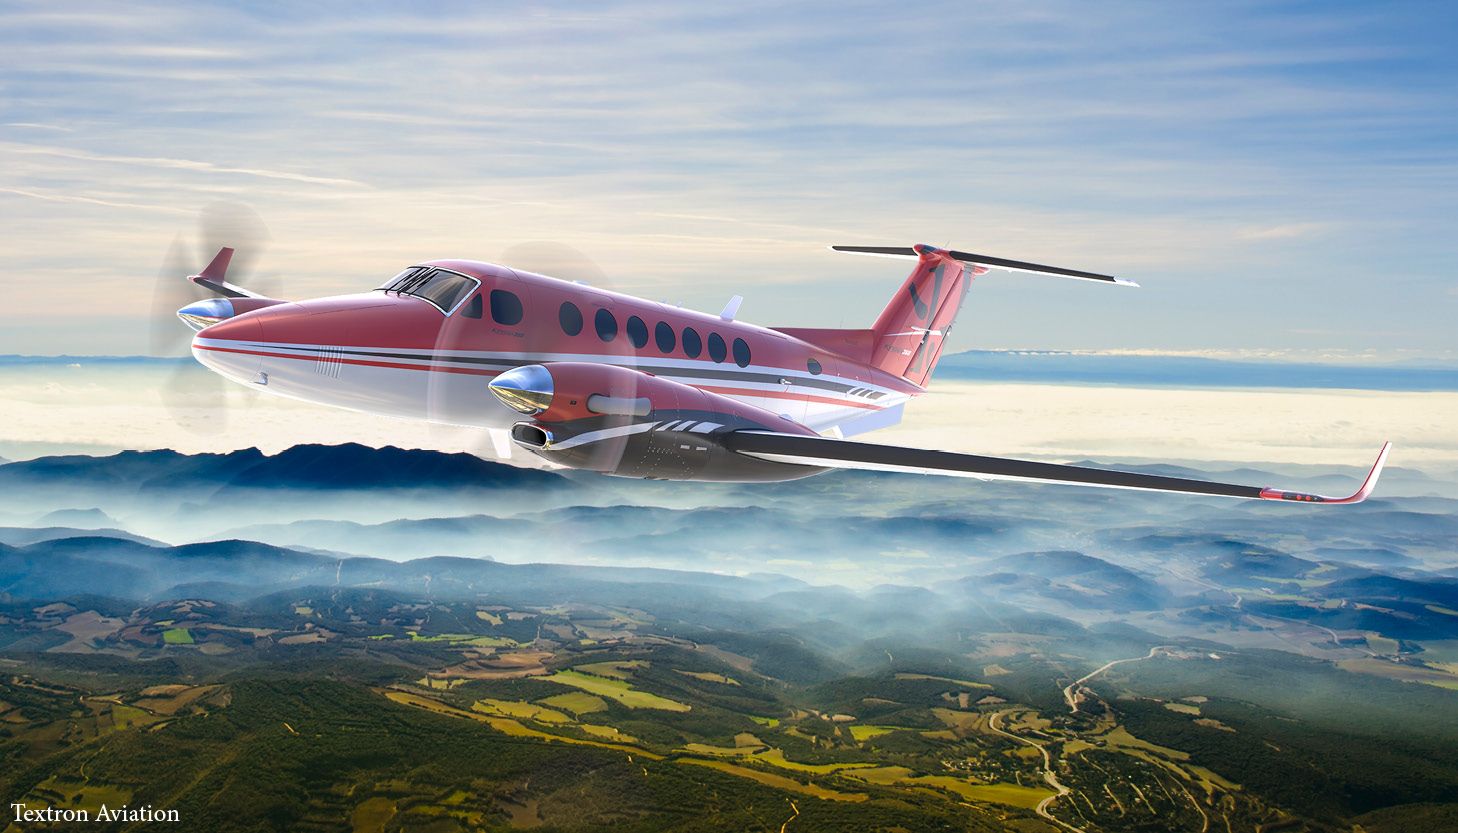 Beechcraft King Air special Crimson Edition unveiled in honor of 60th anniversary